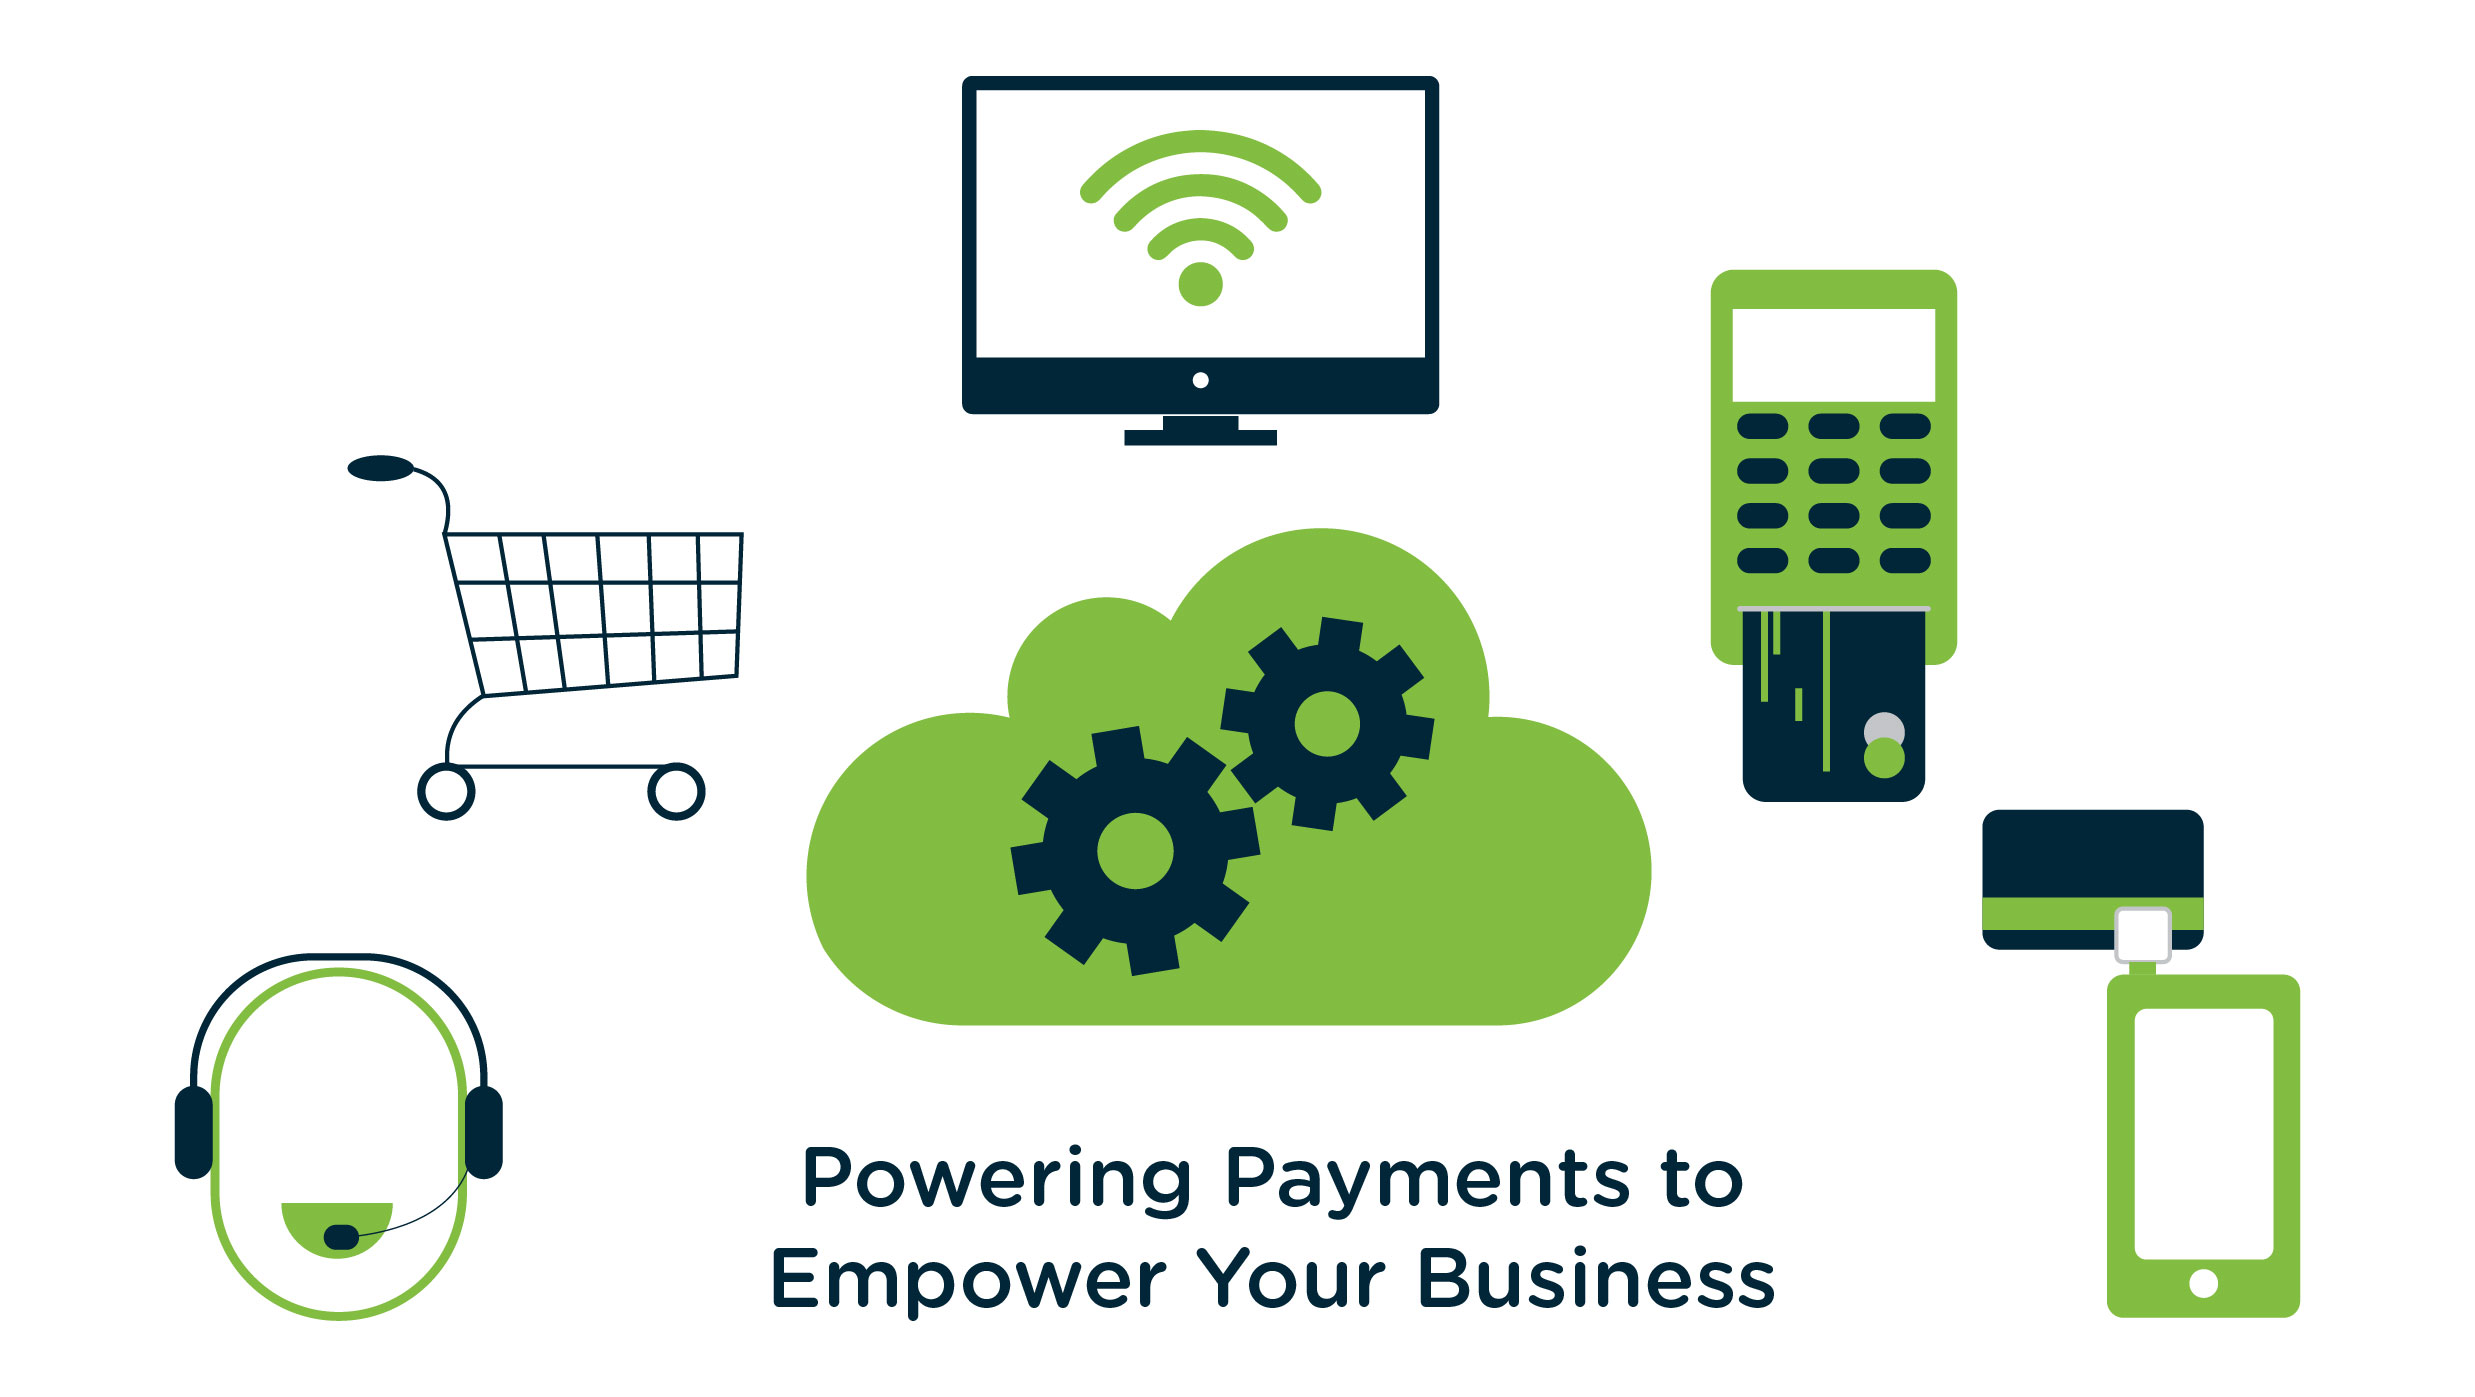 omni-channel payment processing with APS Payments